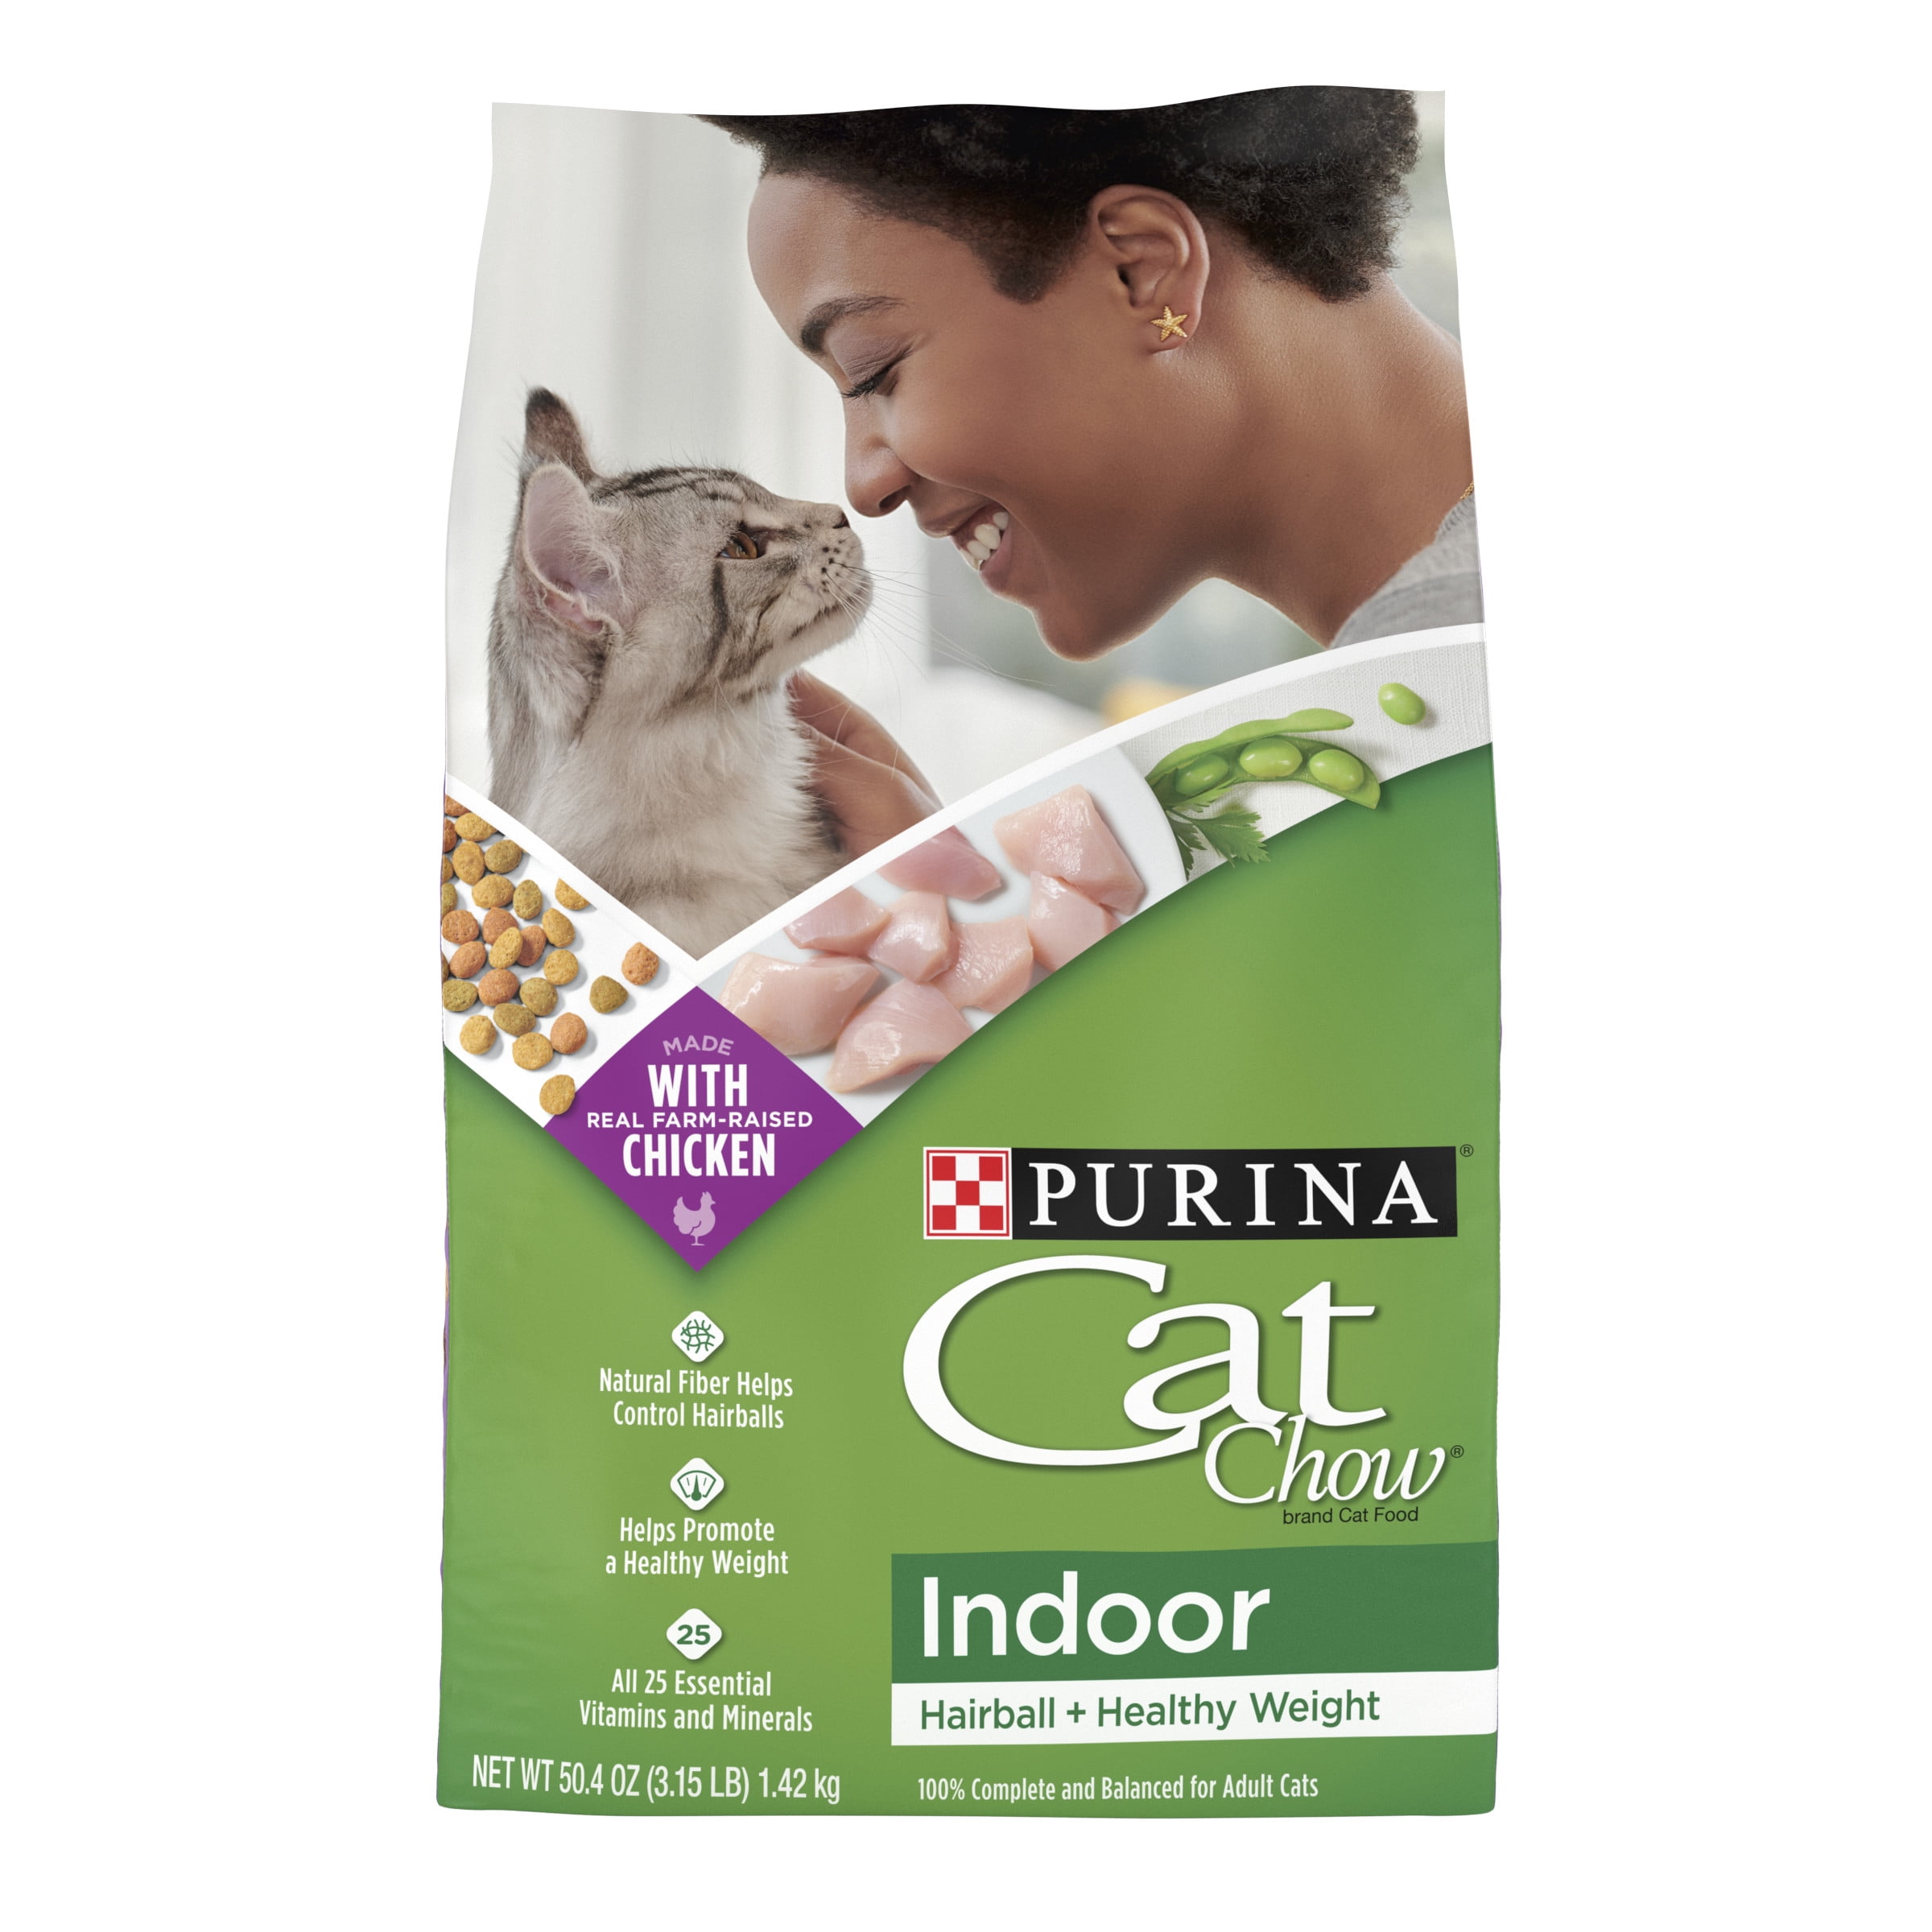 Purina Cat Chow Indoor Hairball & Healthy Dry Cat Food, 3.15 lb Bag